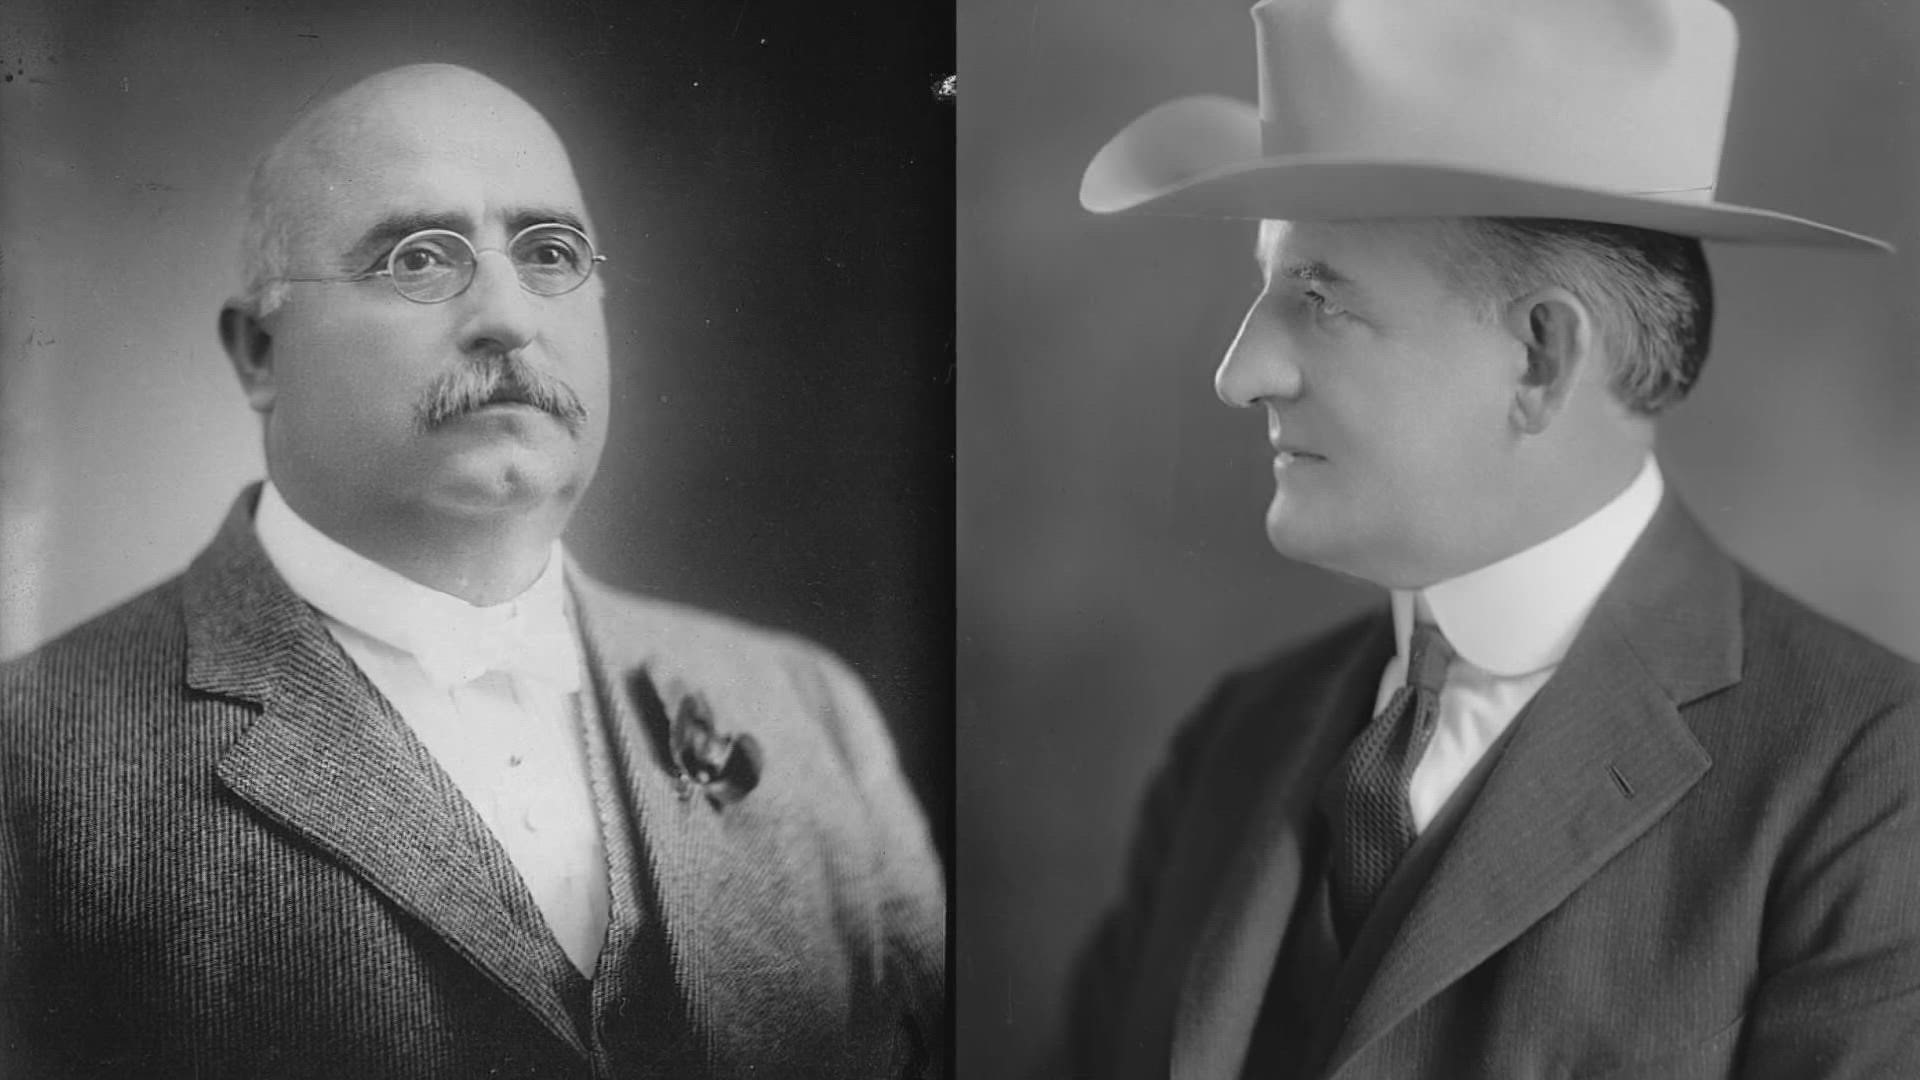 The 1916 gubernatorial election was so close that it came down to tens of votes in either direction. At one point, we even had two governors.